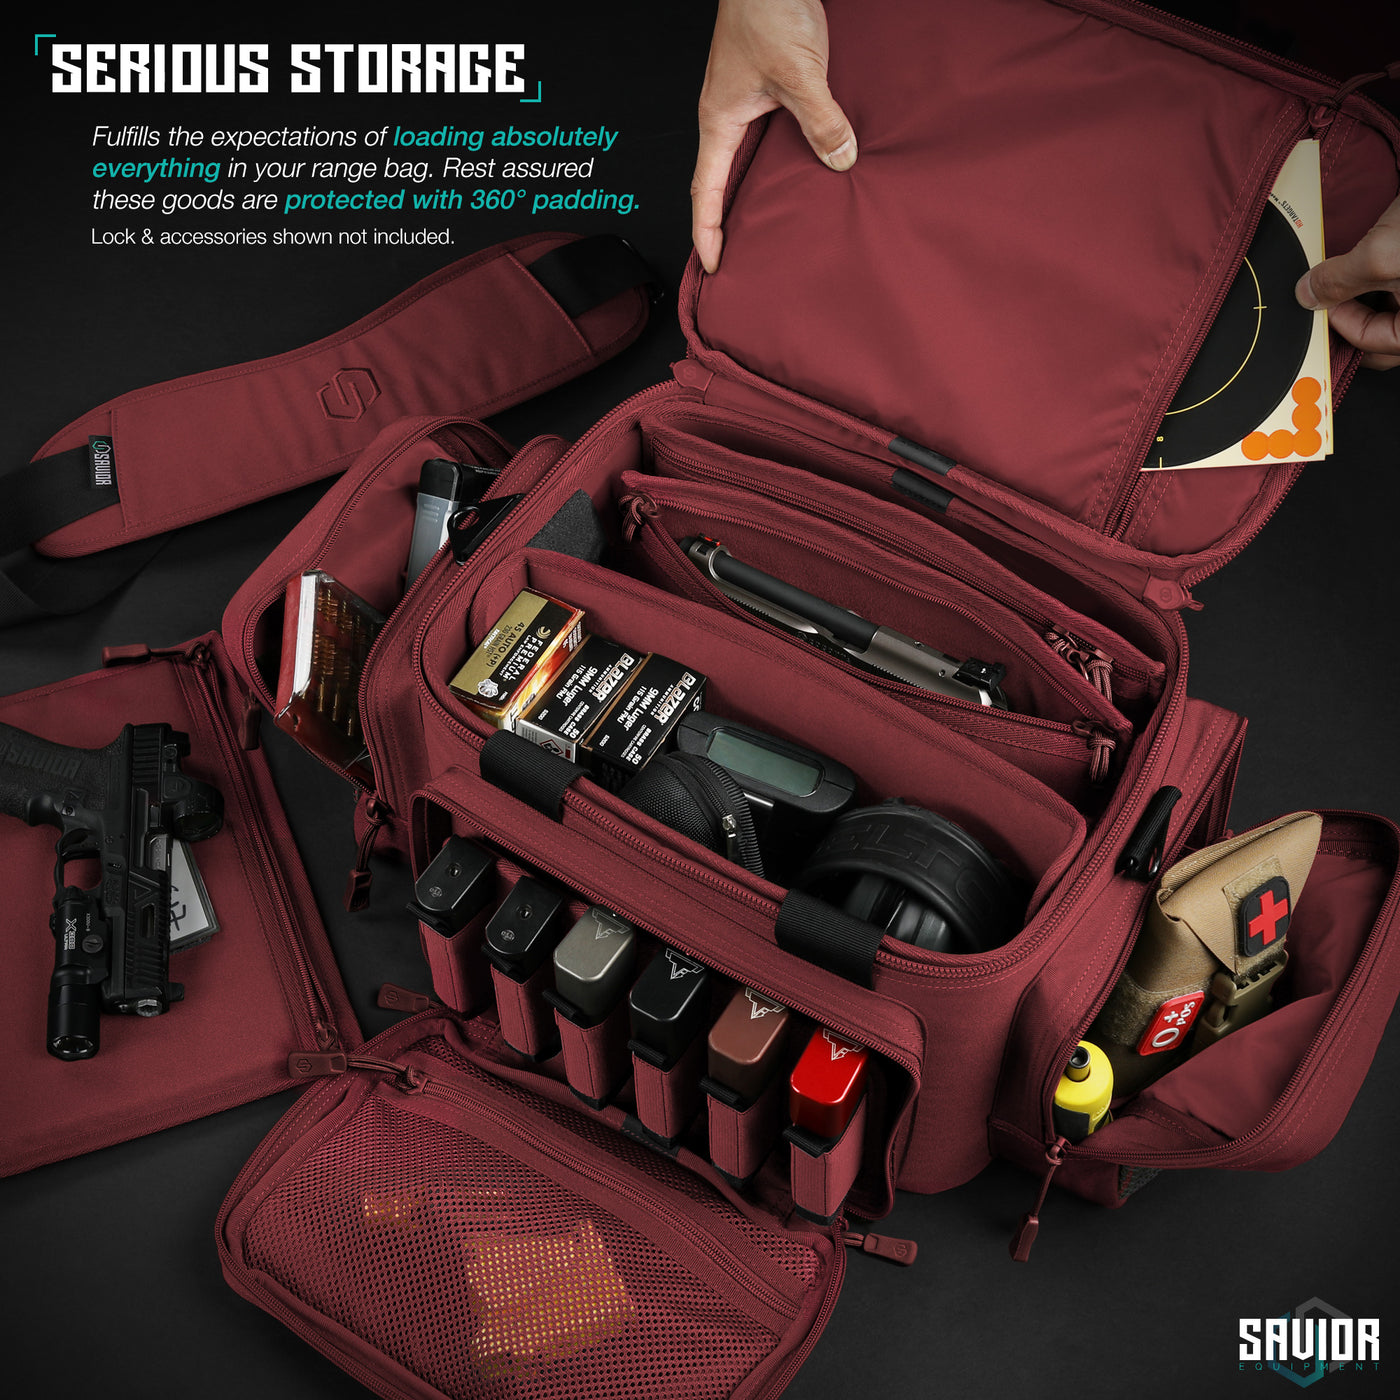 Serious Storage - Fulfills the expectations of loading absolutely everything in your range bag. Rest assured these goods are protected with 360° padding. Locks & accessories shown not included.